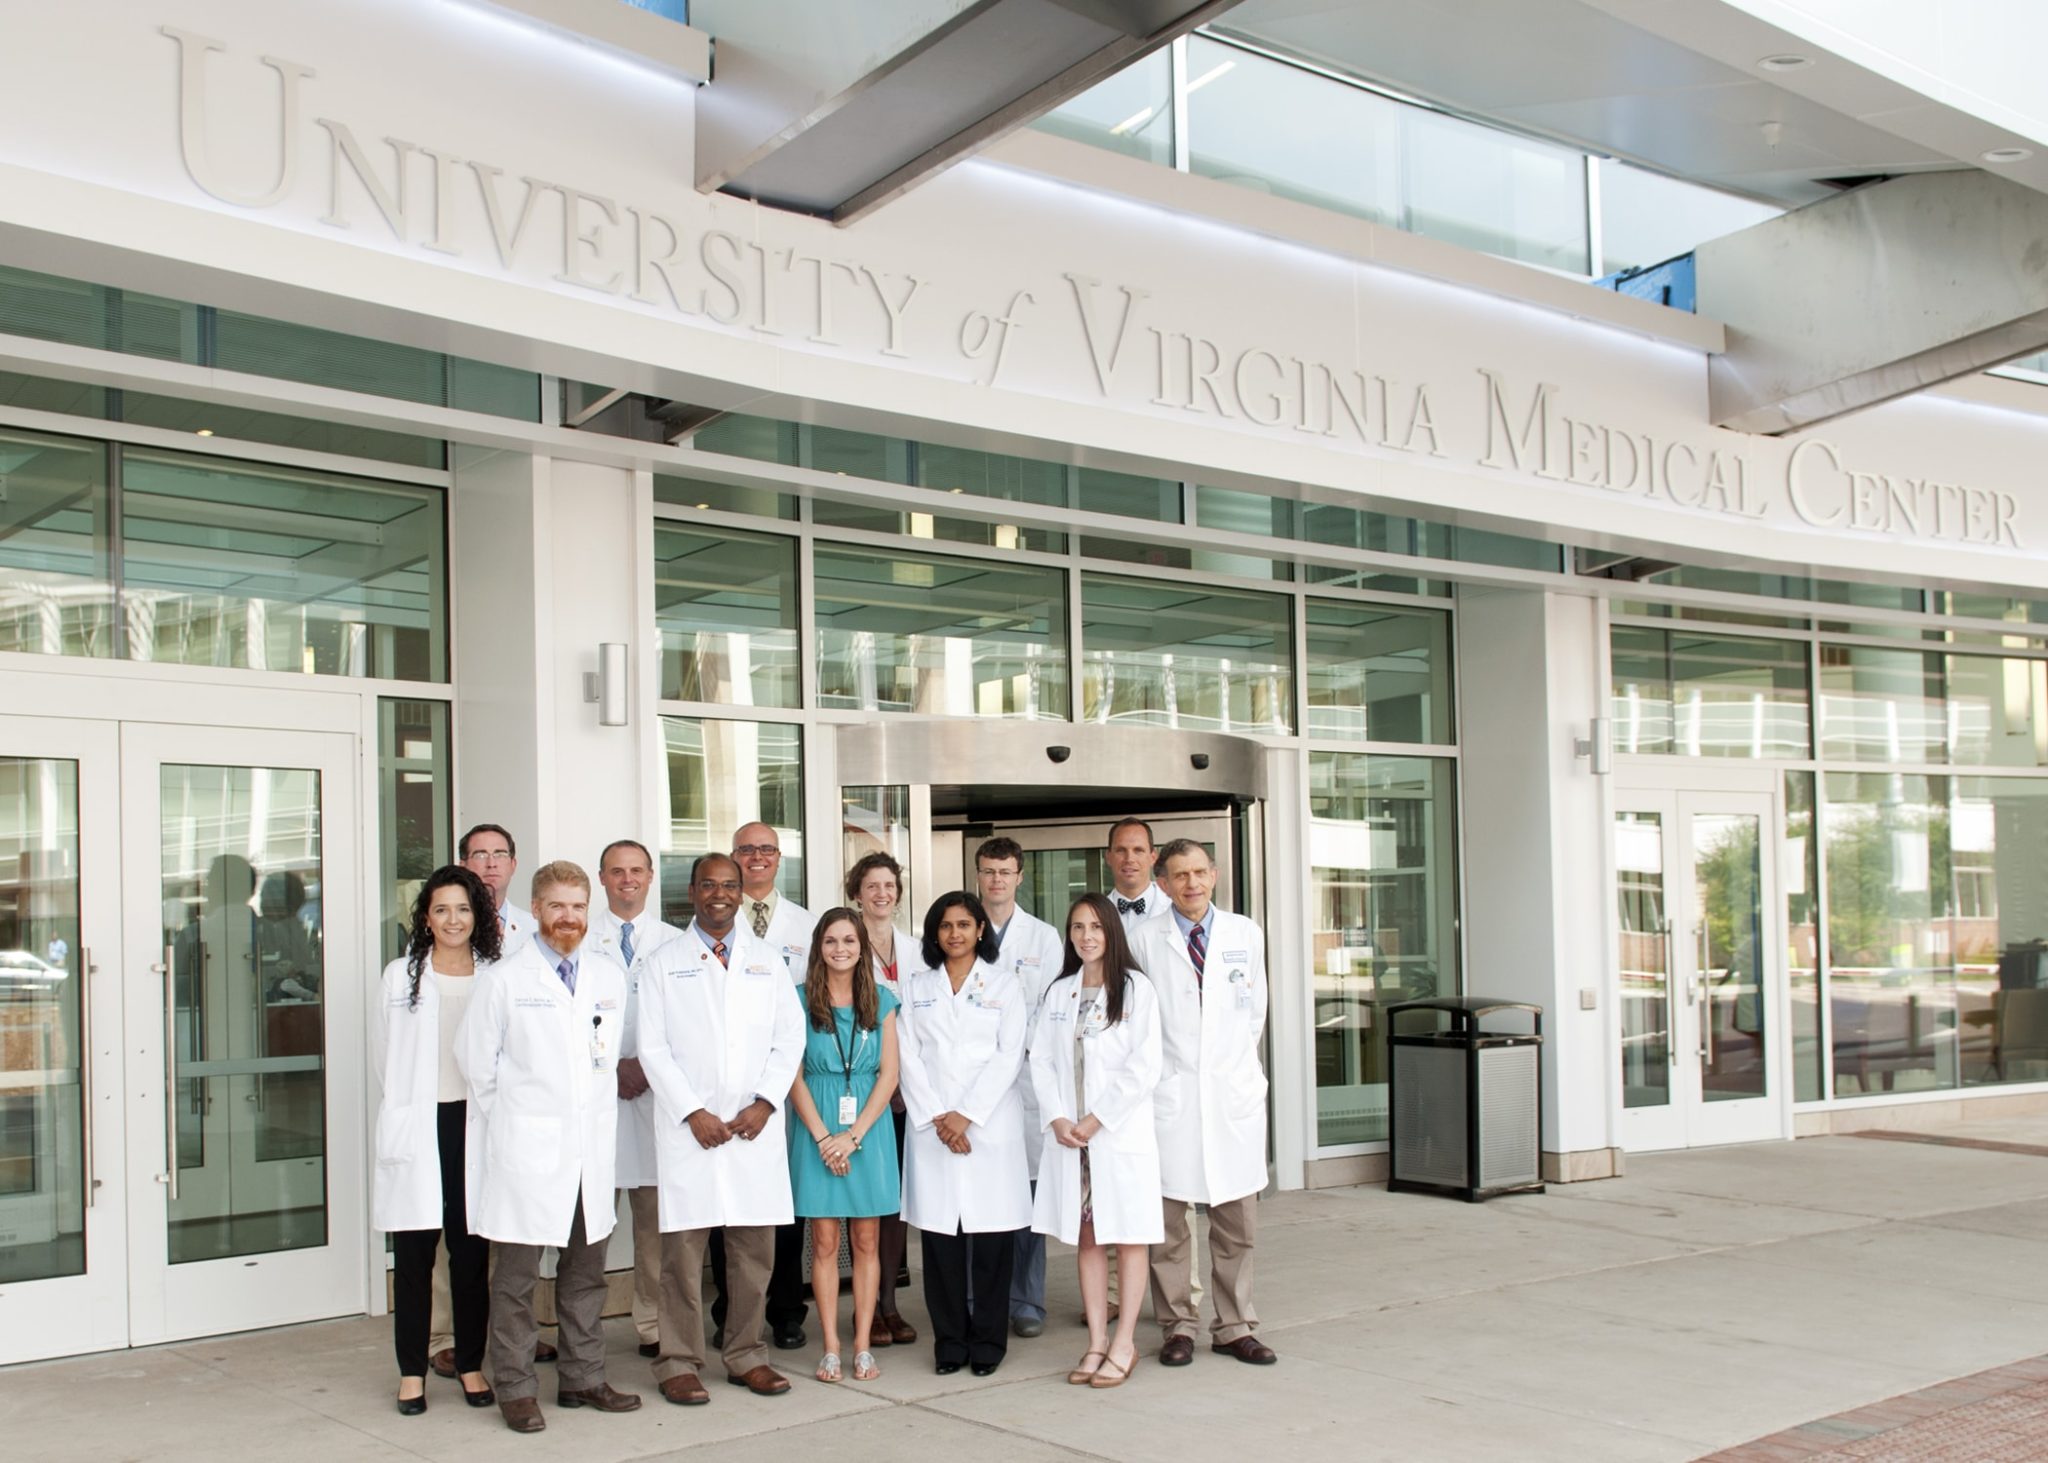 The UVA radiology team stands outside the UVA Health System Hospital